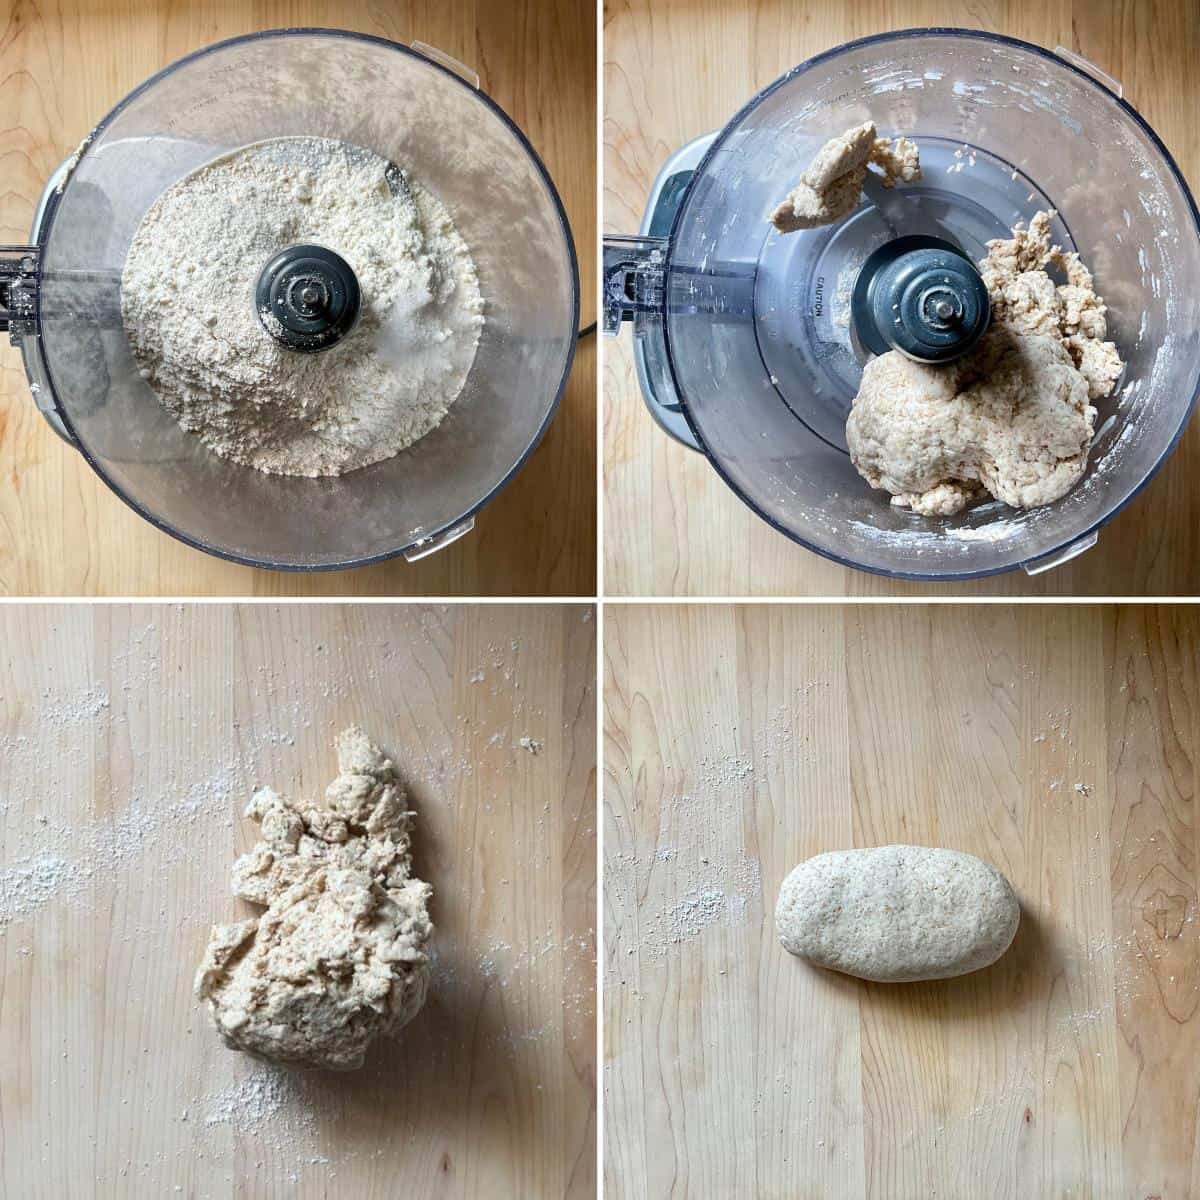 The ingredients to make cavatelli pasta dough are combined using a food processor.